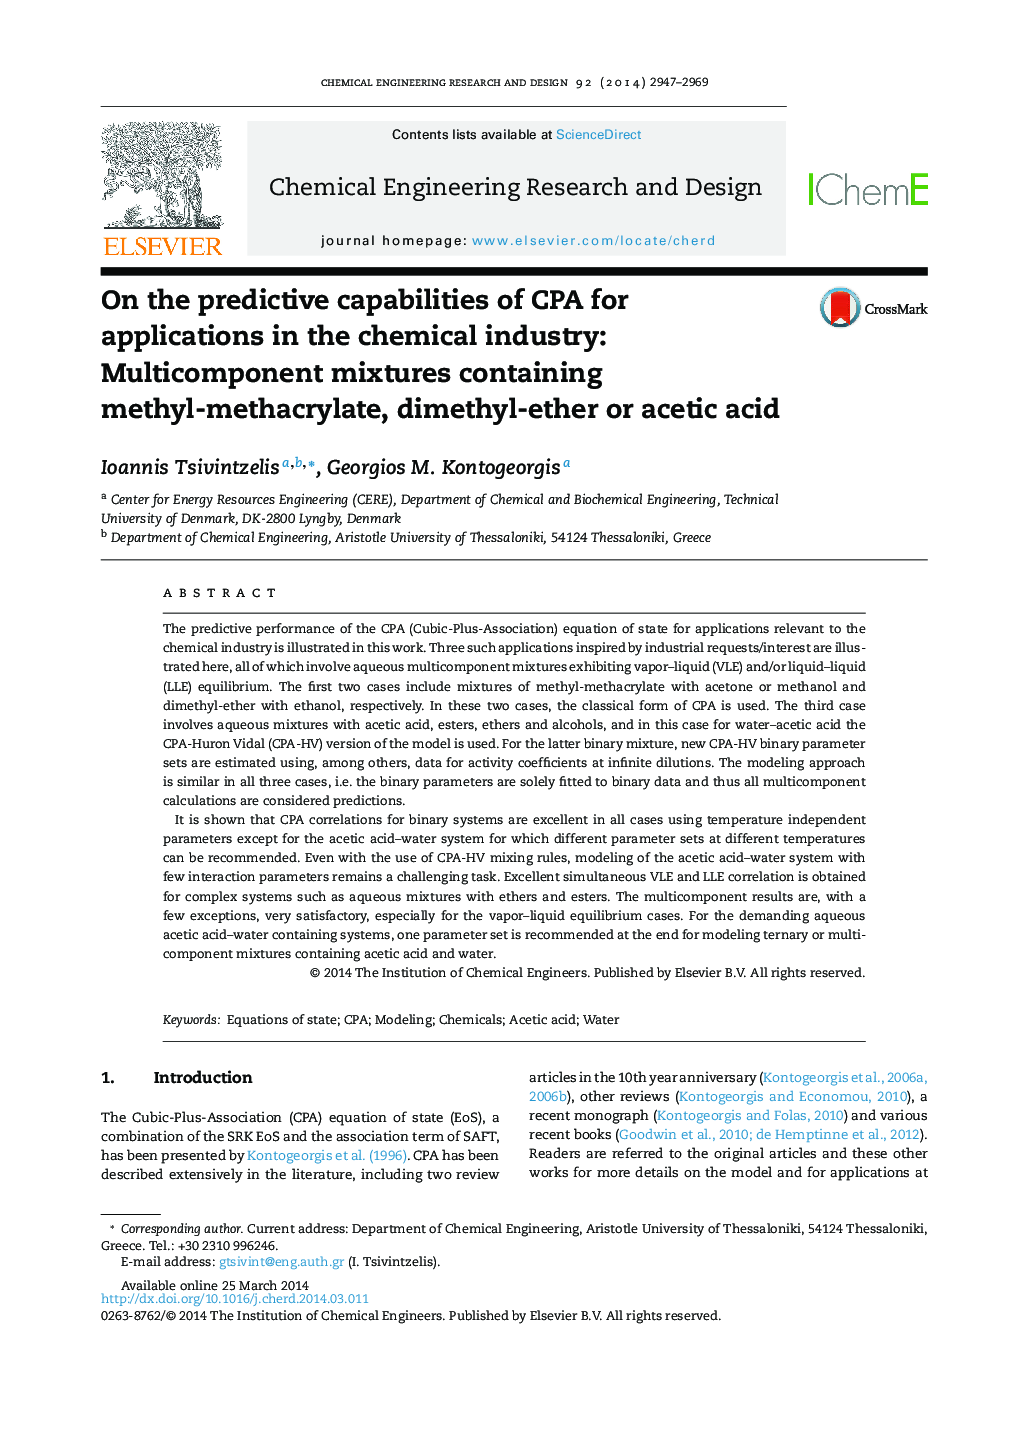 On the predictive capabilities of CPA for applications in the chemical industry: Multicomponent mixtures containing methyl-methacrylate, dimethyl-ether or acetic acid